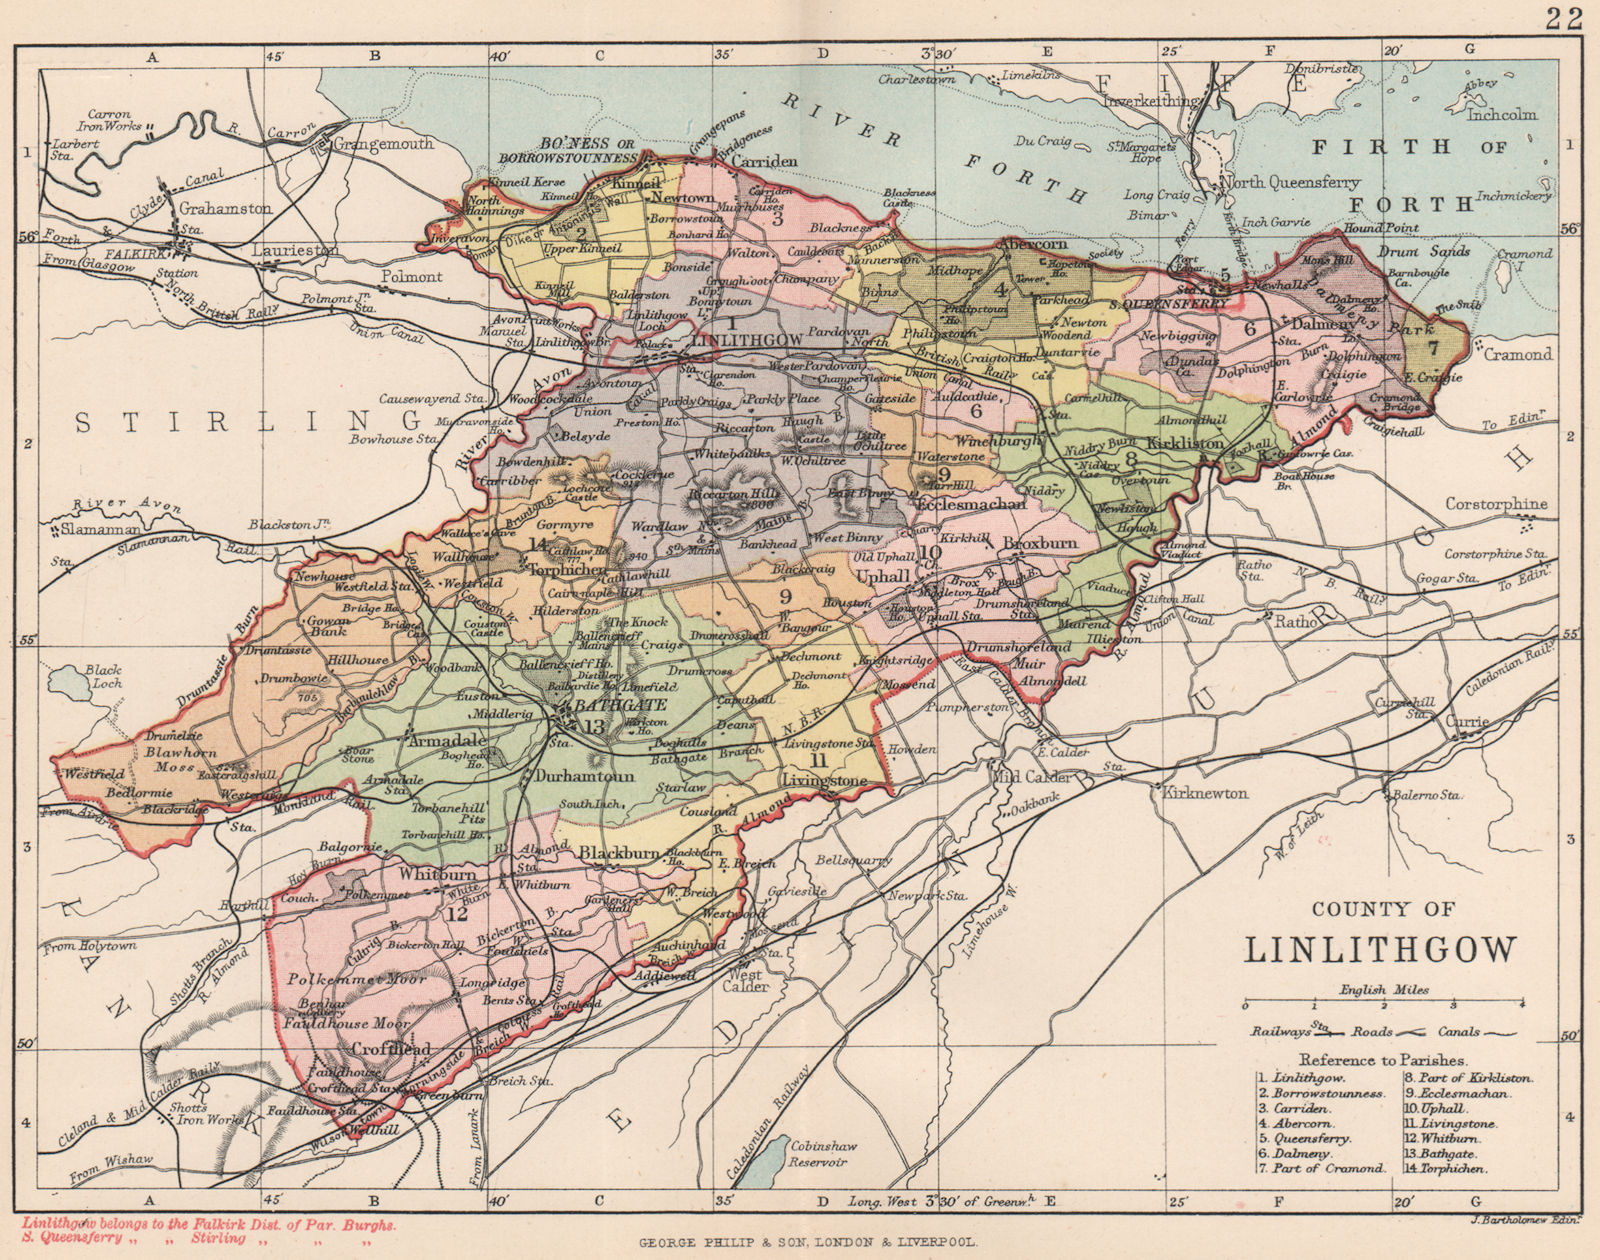 Associate Product 'County of Linlithgow'. Linlithgowshire. Parishes. BARTHOLOMEW 1891 old map